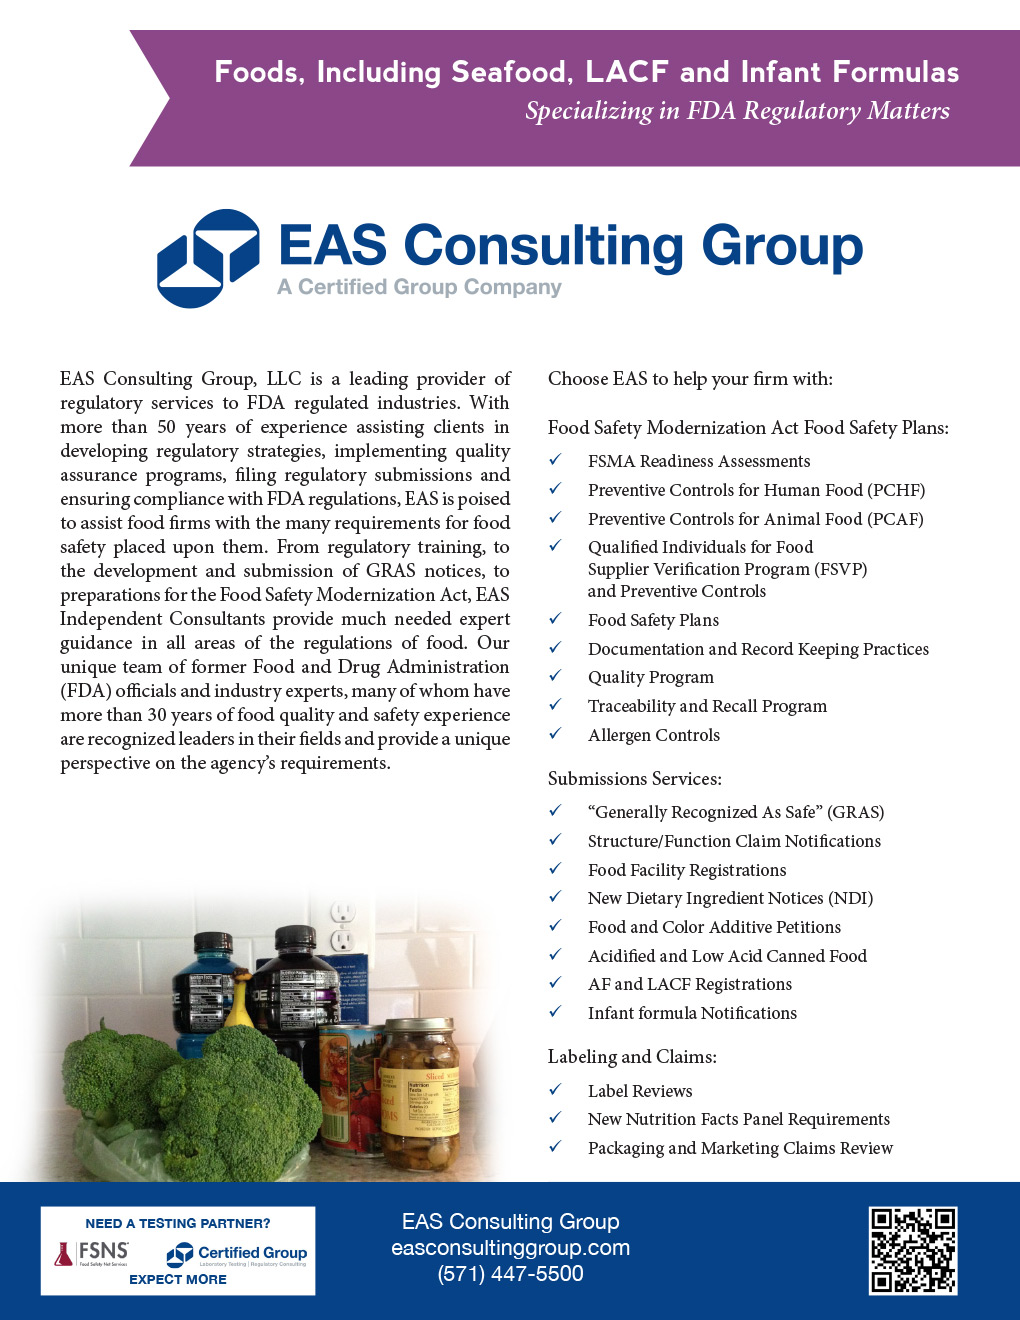 Foods Including Seafood LACF and Infant Formulas Services